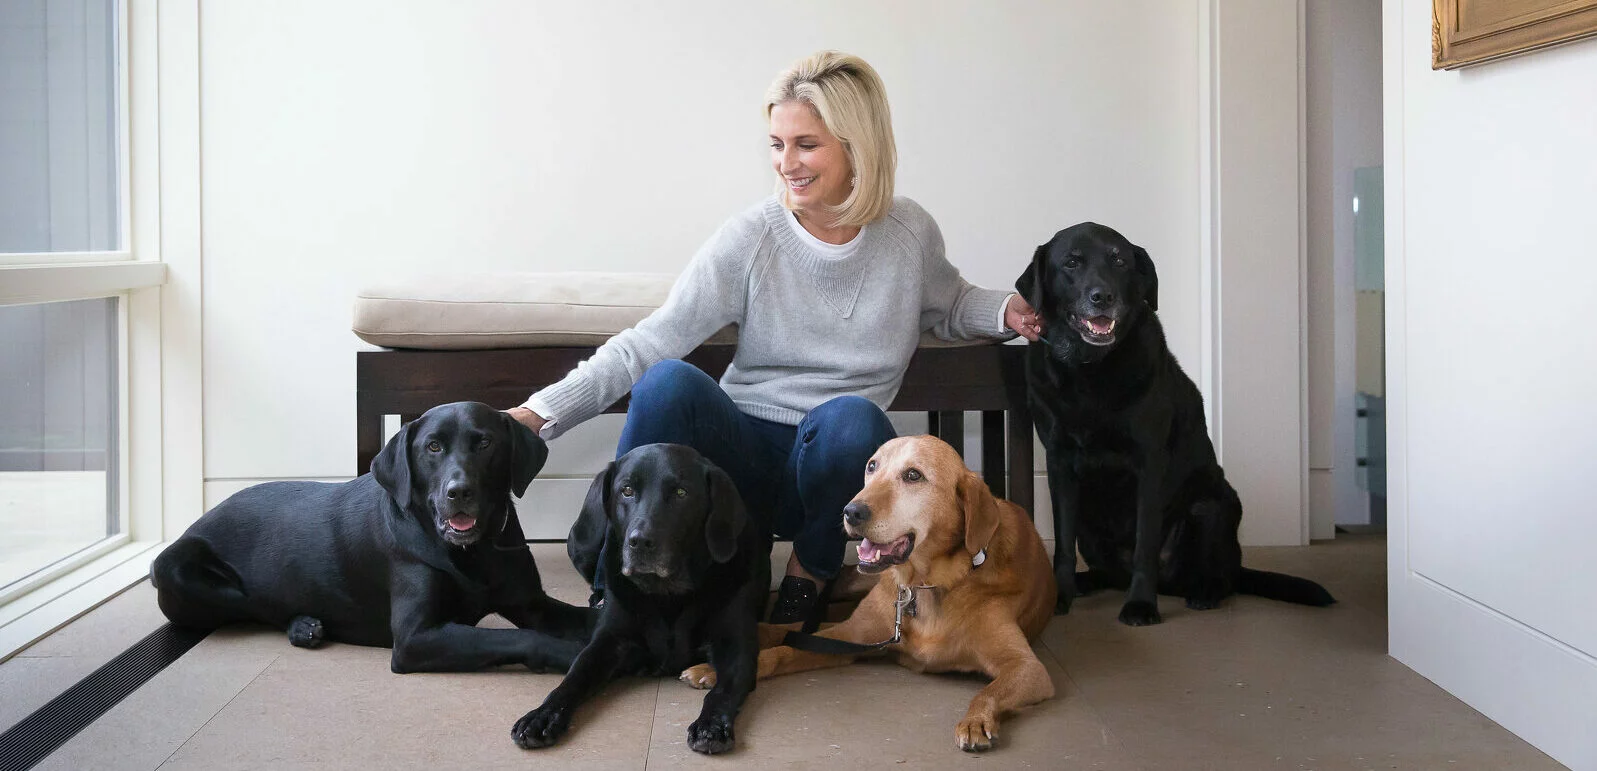 Cathy and her four dogs